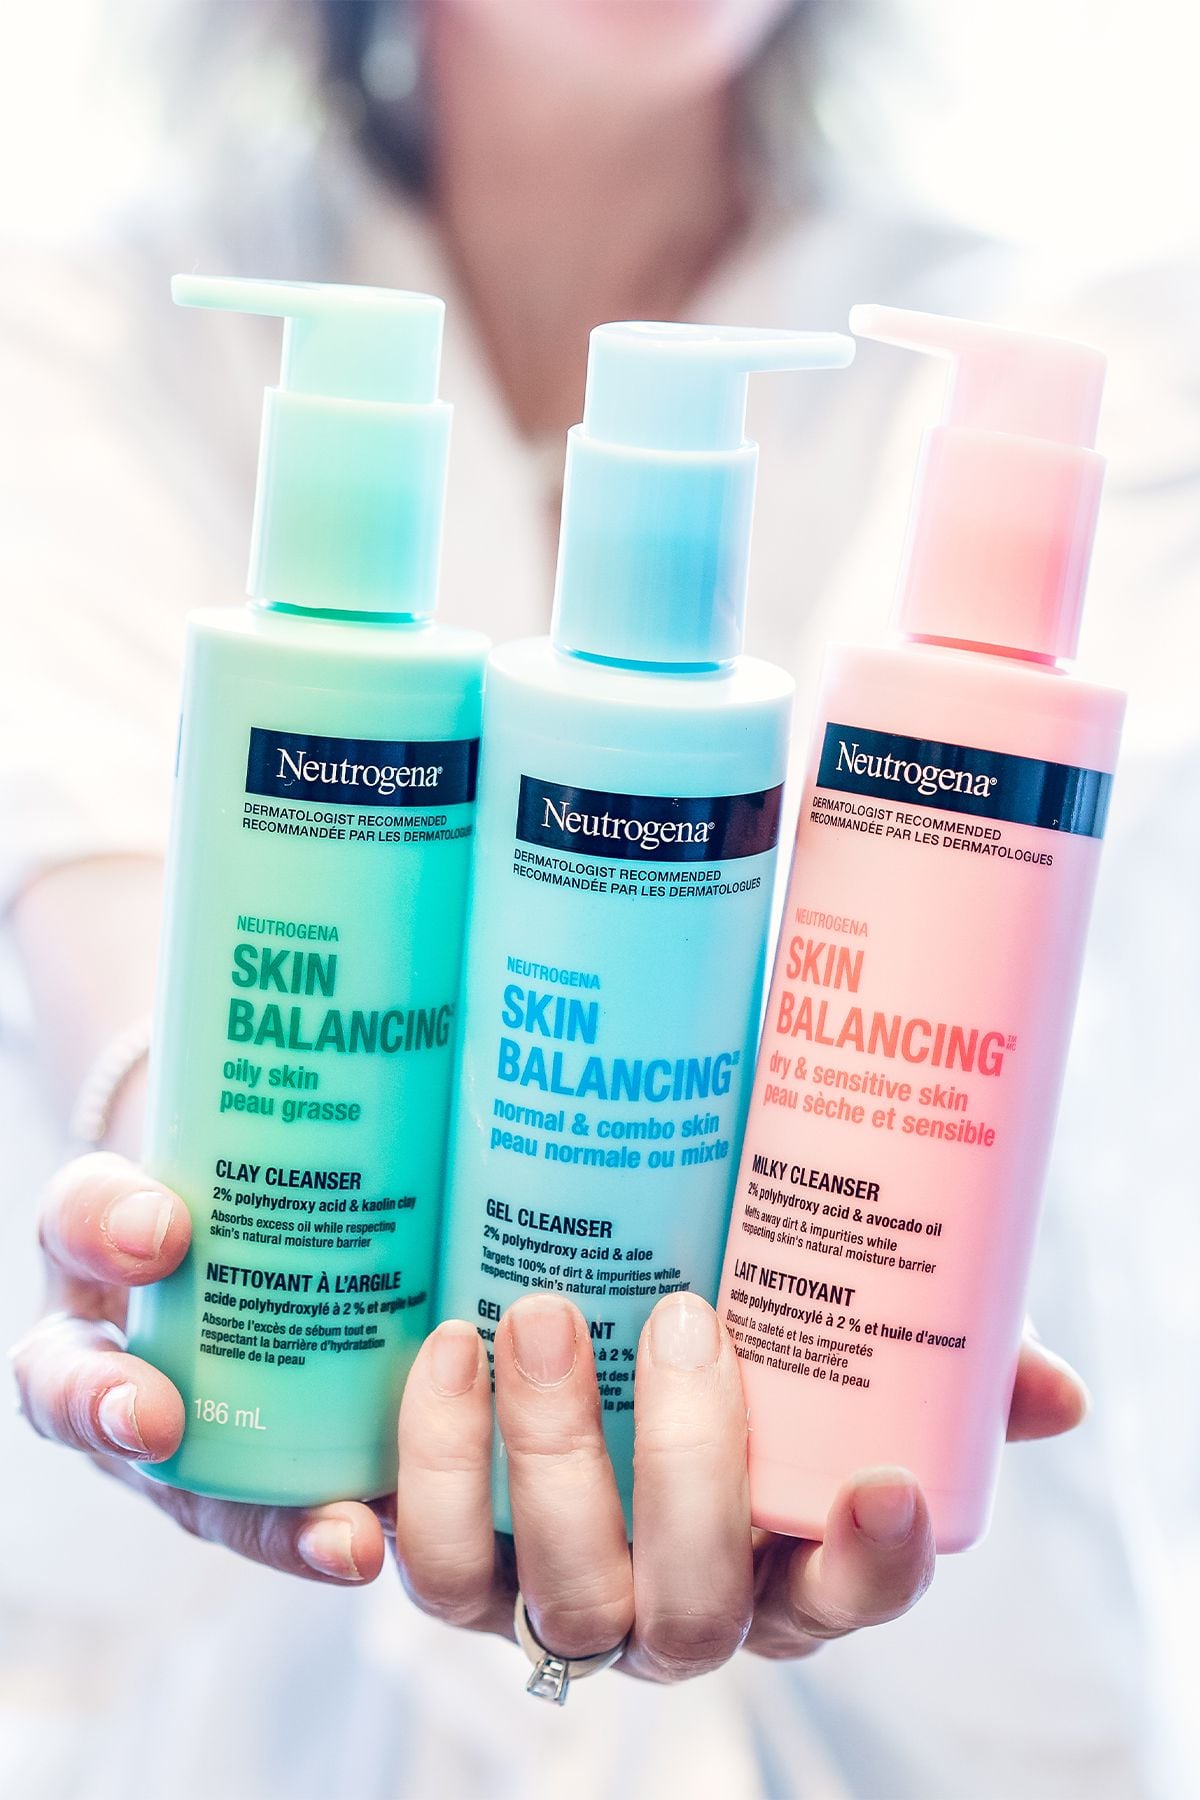 Neutrogena Is Closing Its Los Angeles Office and Laying Off Staff